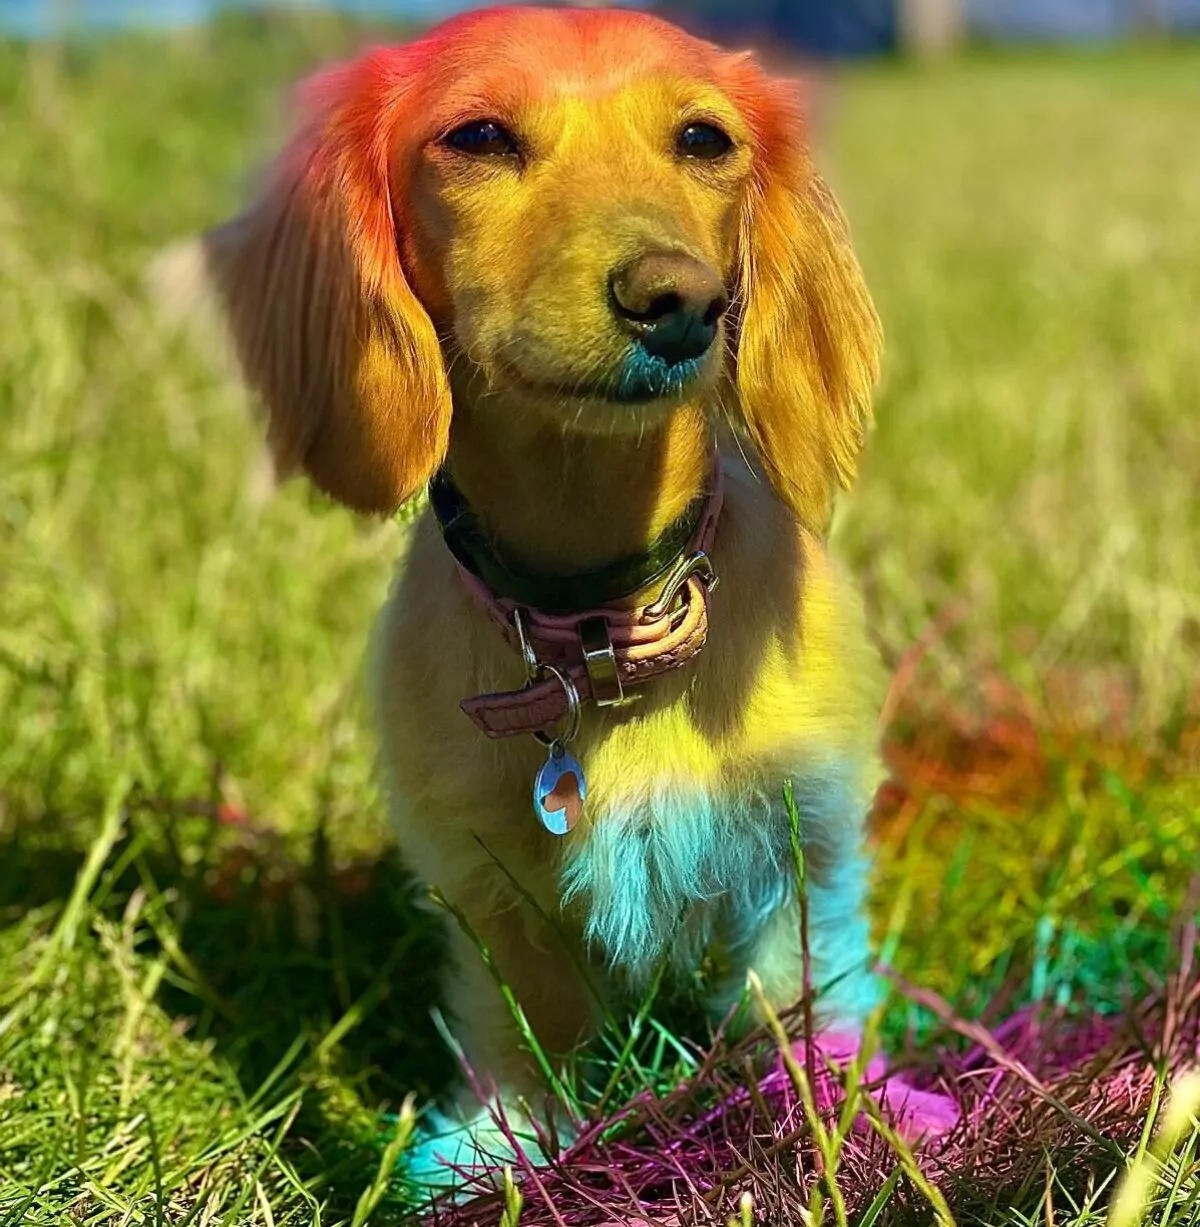 Dachshund covered in a rainbow reflection at doggy day care